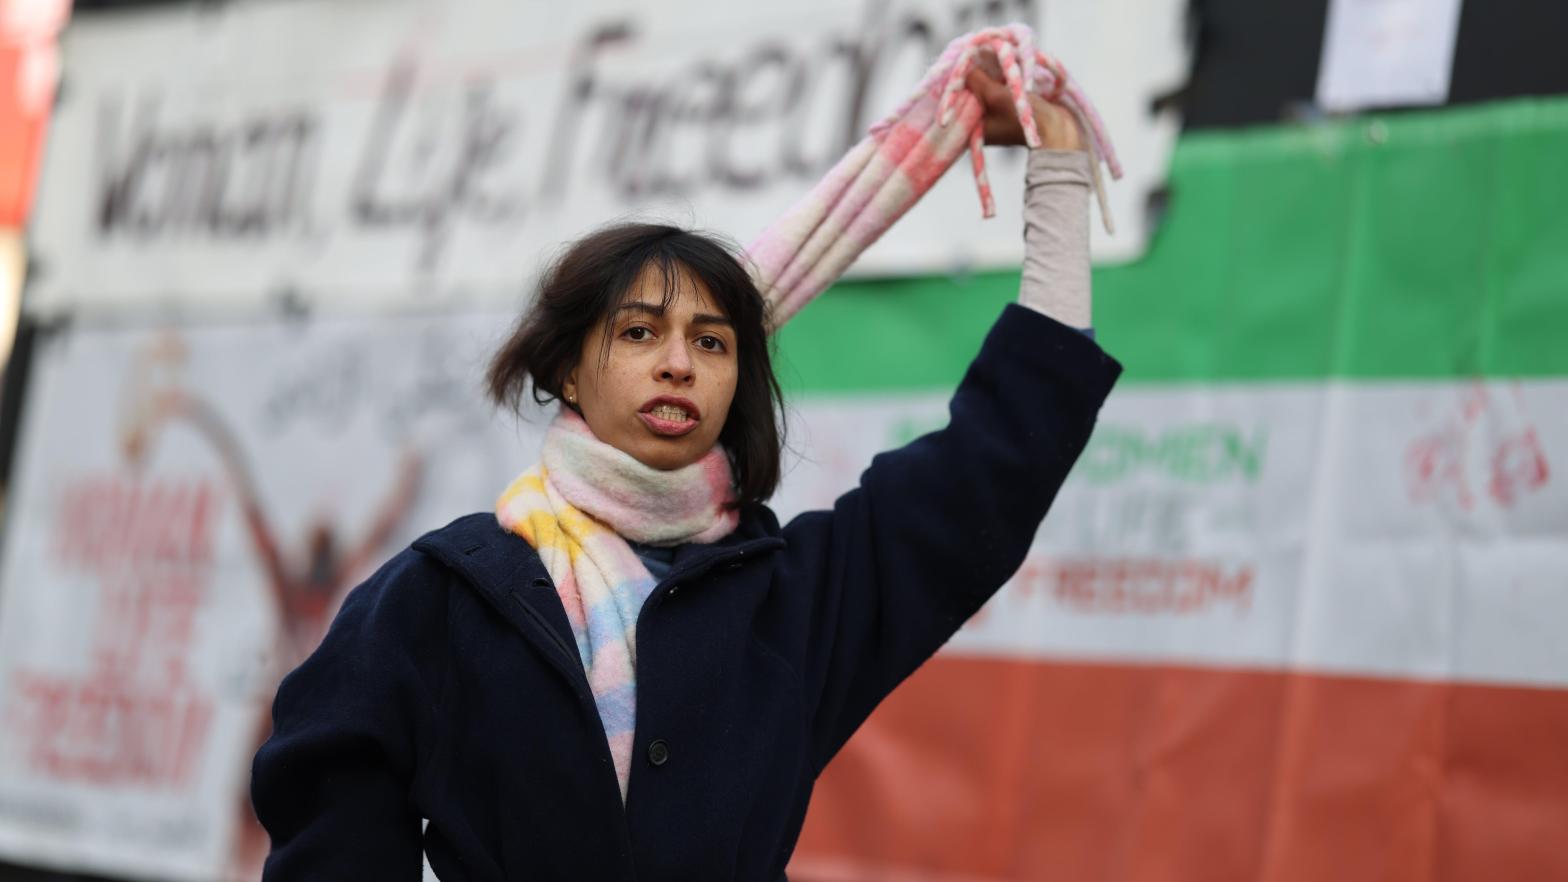 A demonstrator holds a scarf like a noose around her neck during a One Law for All dance protest at Piccadilly Circus on December 17, 2022 in London, England (Image: Hollie Adams, Getty Images)